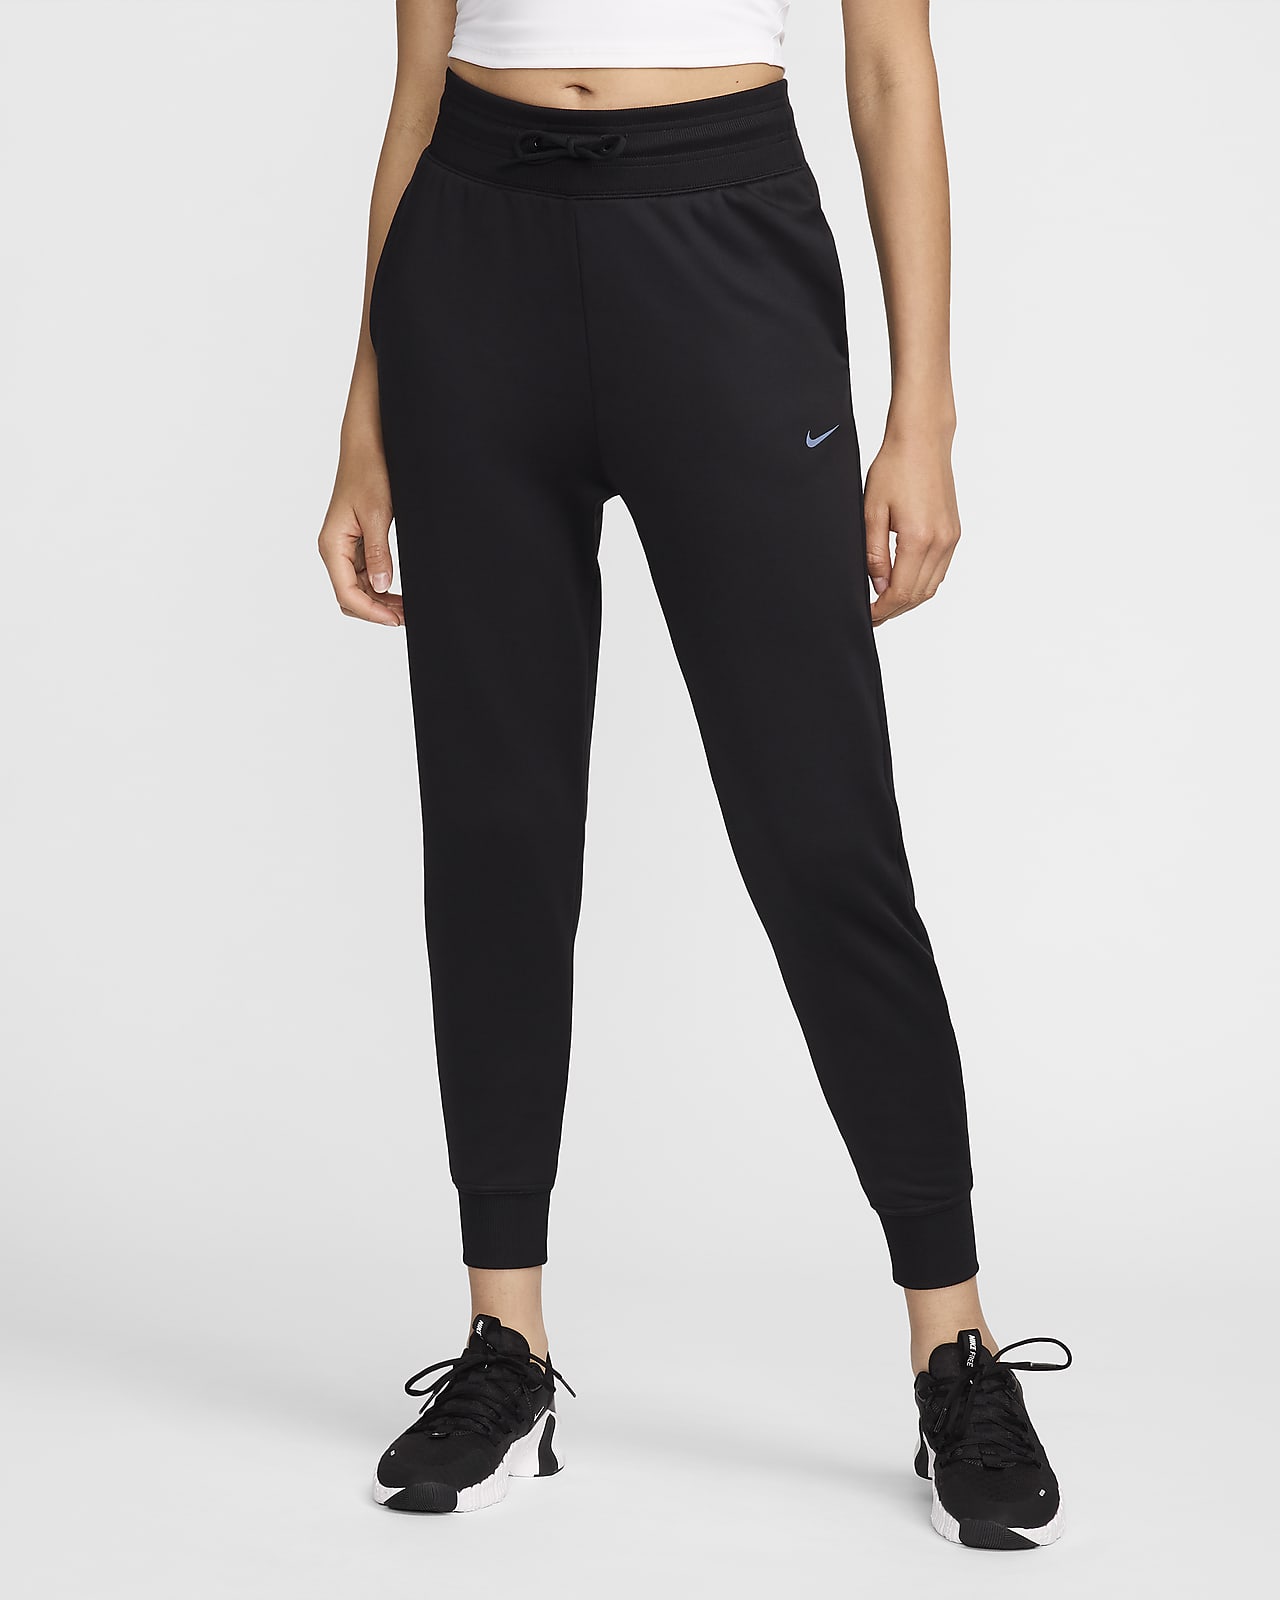 Nike Dri-FIT Fast Women's Mid-Rise 7/8 Warm-Up Running Trousers. Nike AT